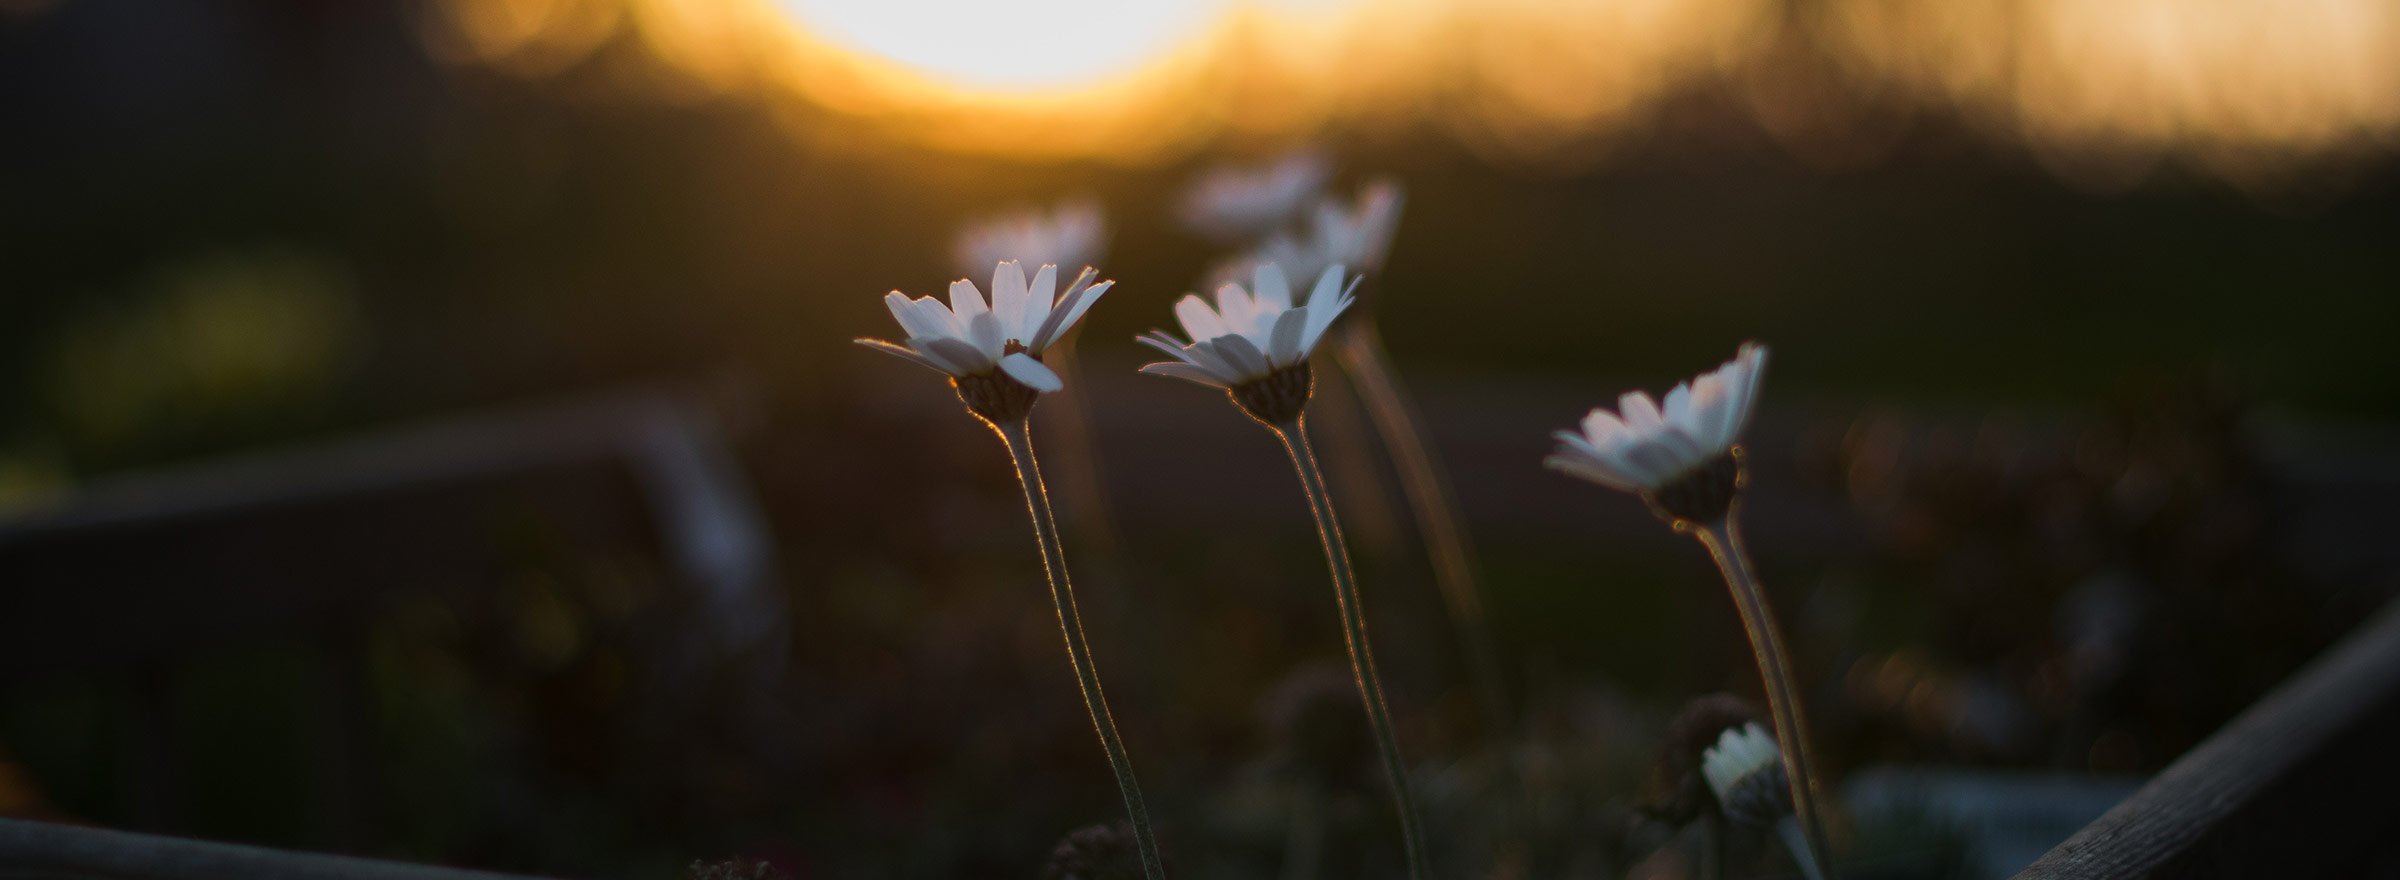 daisies growing toward sunlight, symbolizing returns on investing time and money on social media for nonprofits